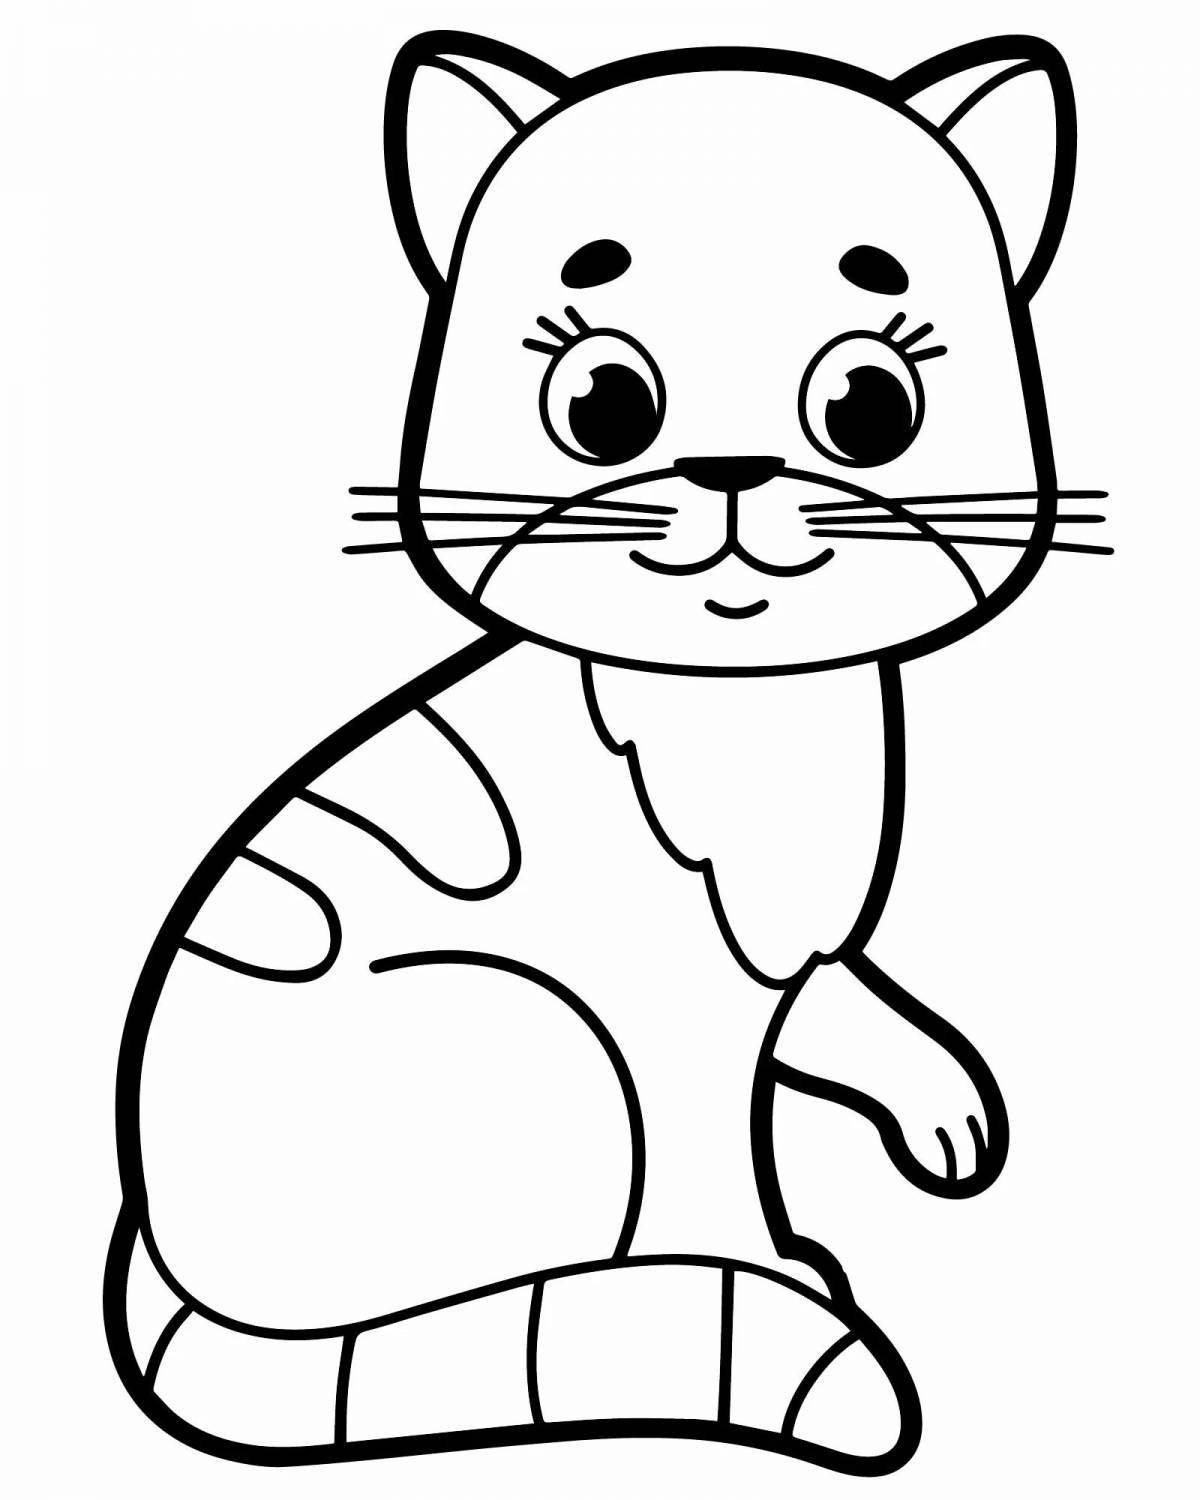 Glitter cat coloring pages for kids